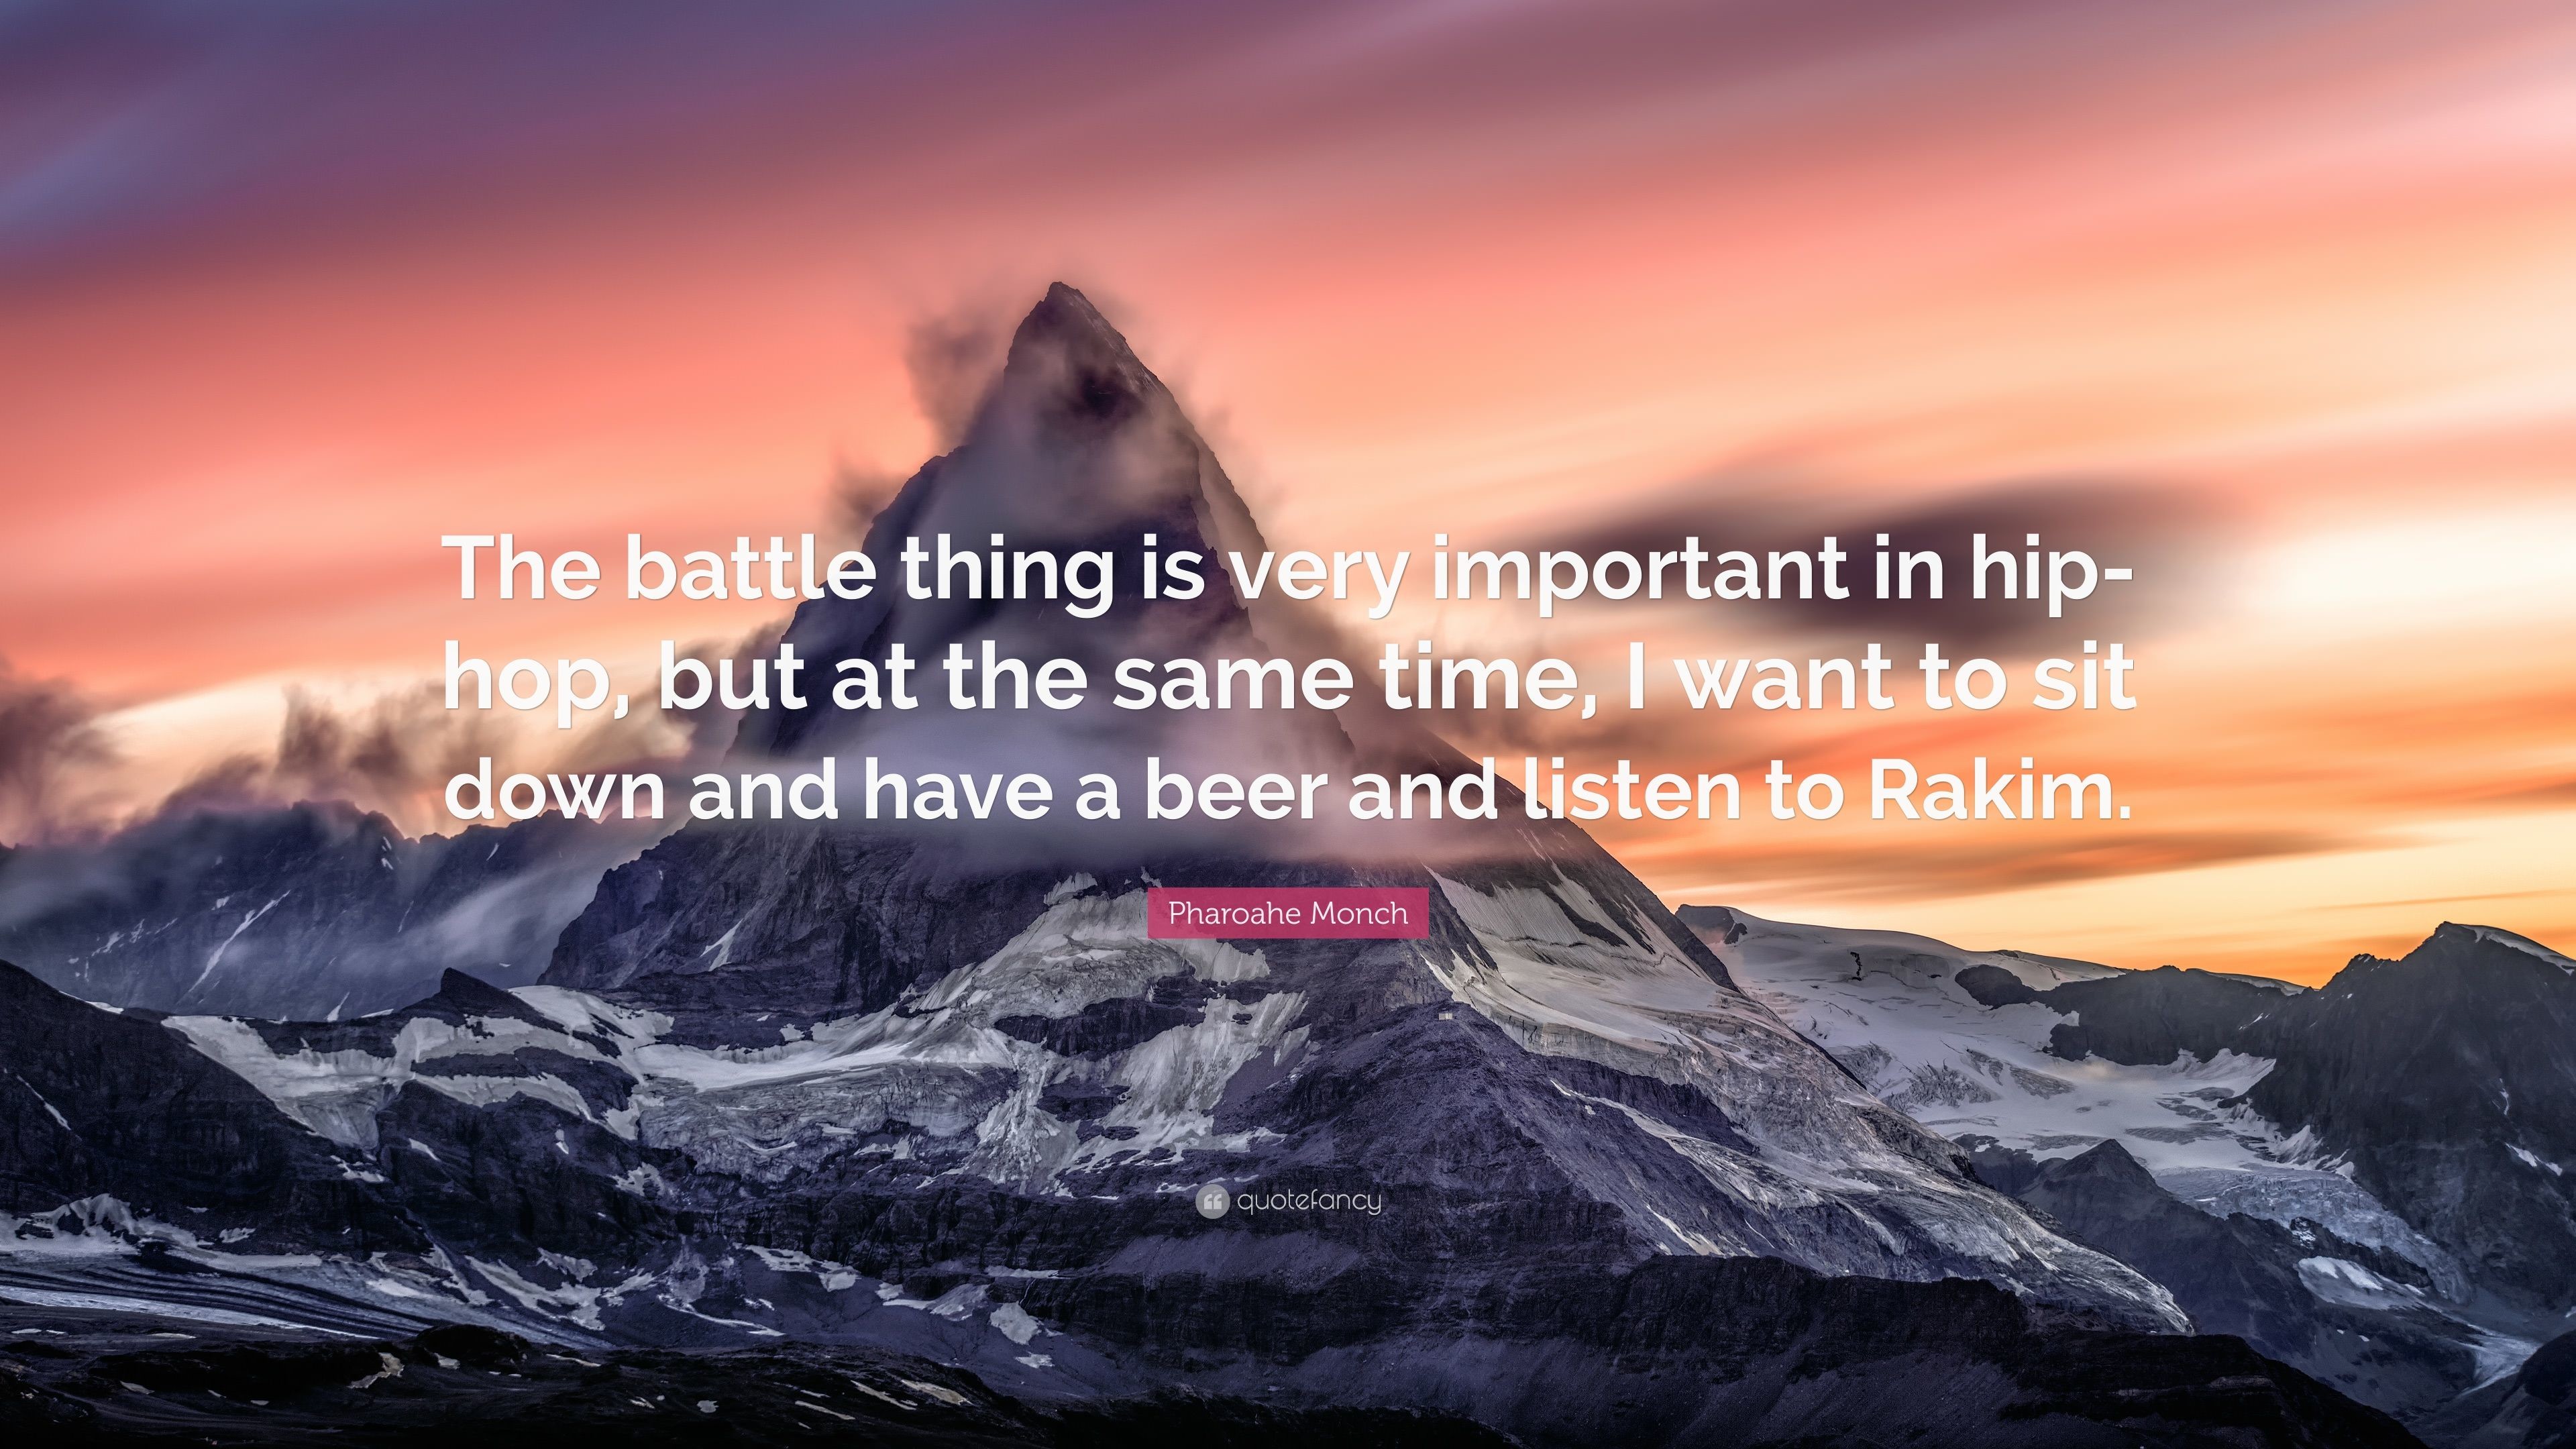 3840x2160 Pharoahe Monch Quote: “The battle thing is very important in hip-hop,